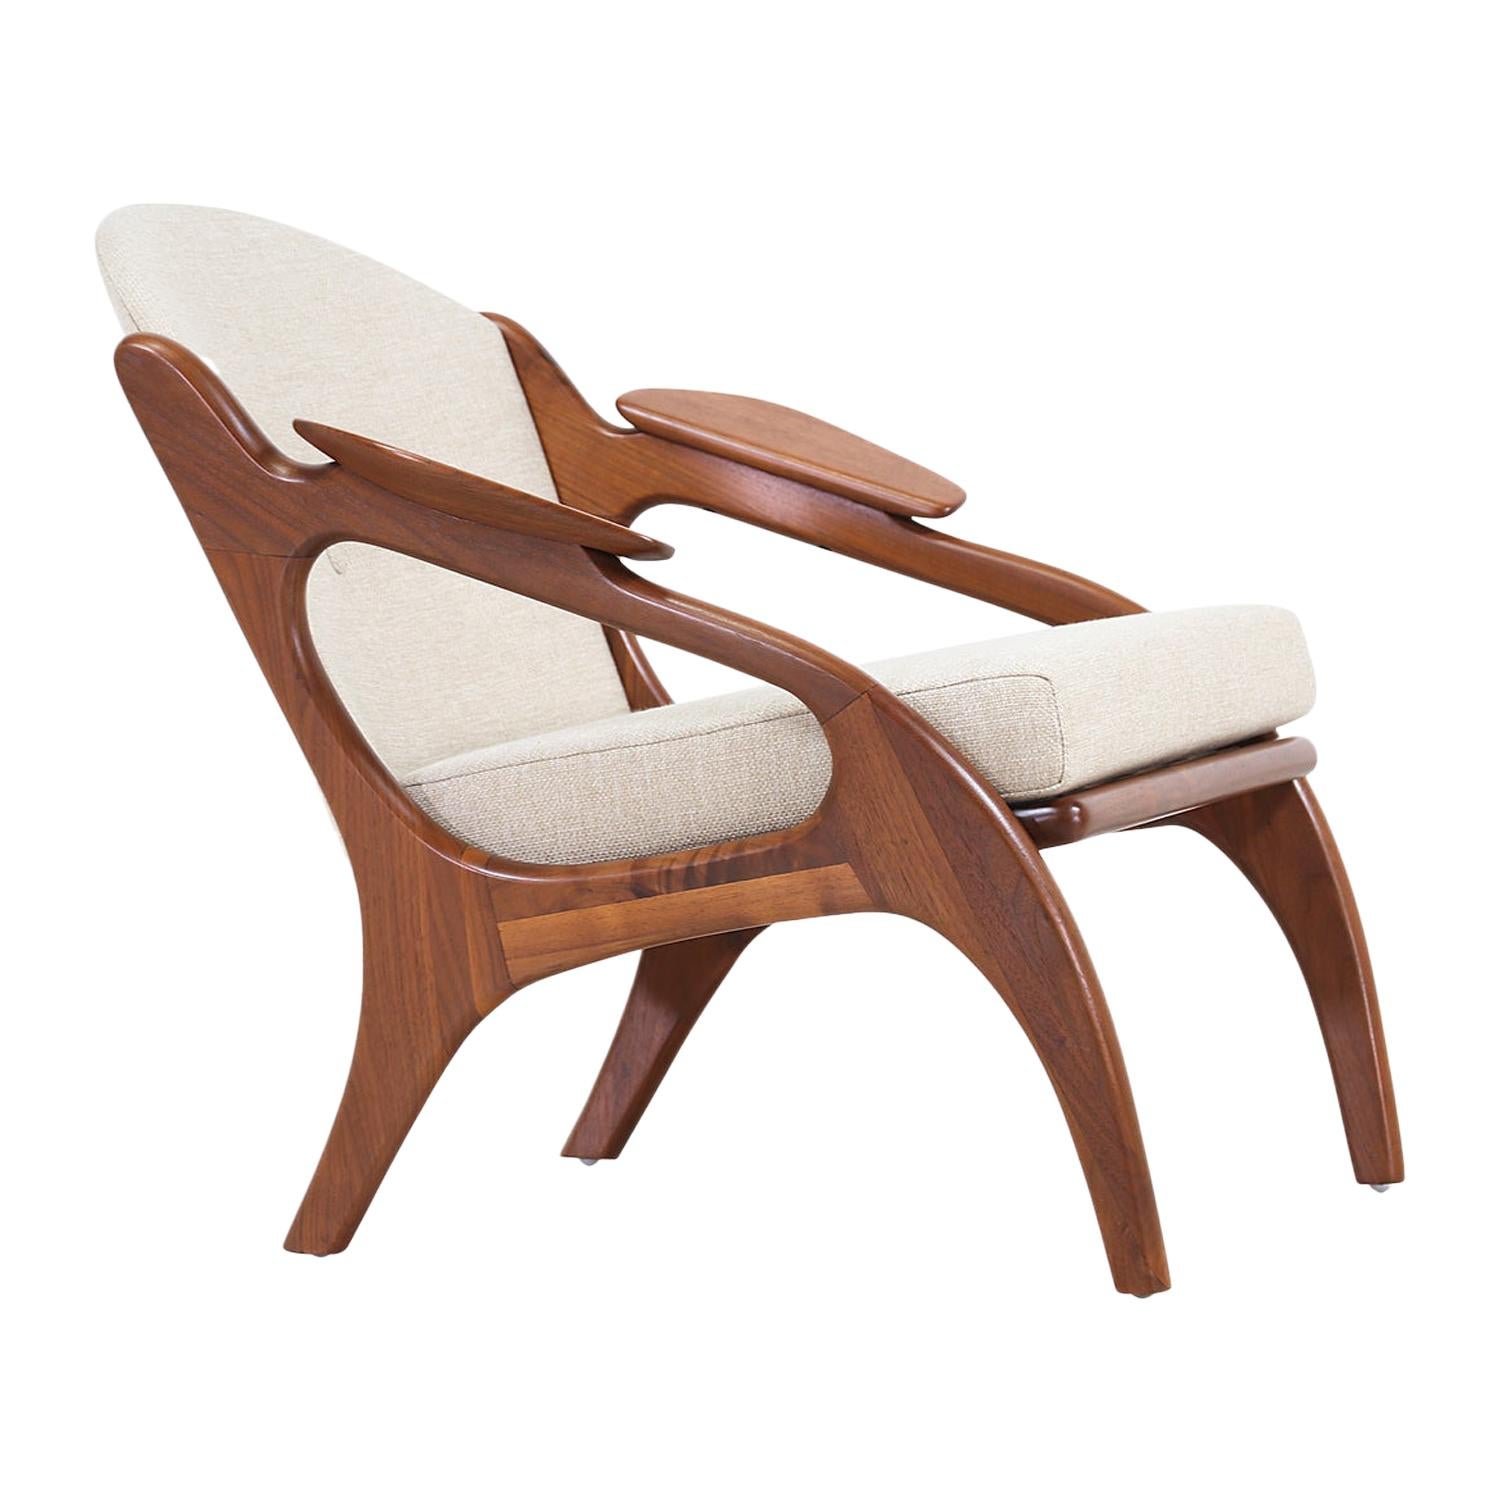 Adrian Pearsall Model 2249-C Walnut Lounge Chair for Craft Associates